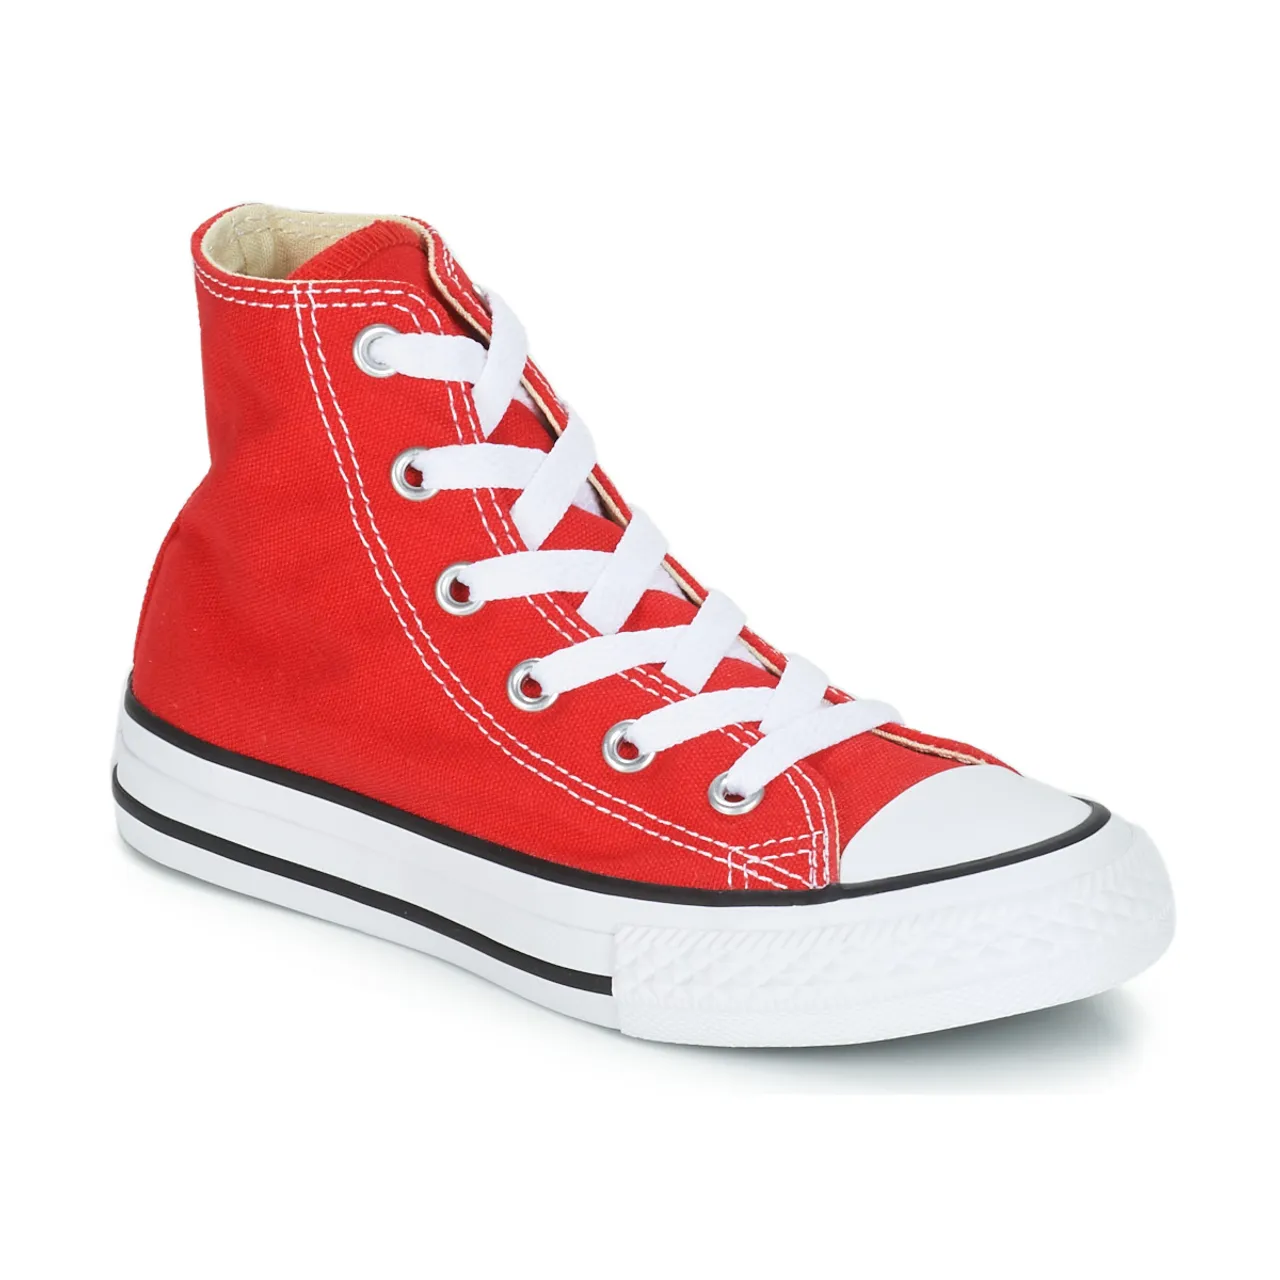 Converse  ALL STAR HI  boys's Children's Shoes (High-top Trainers) in Red